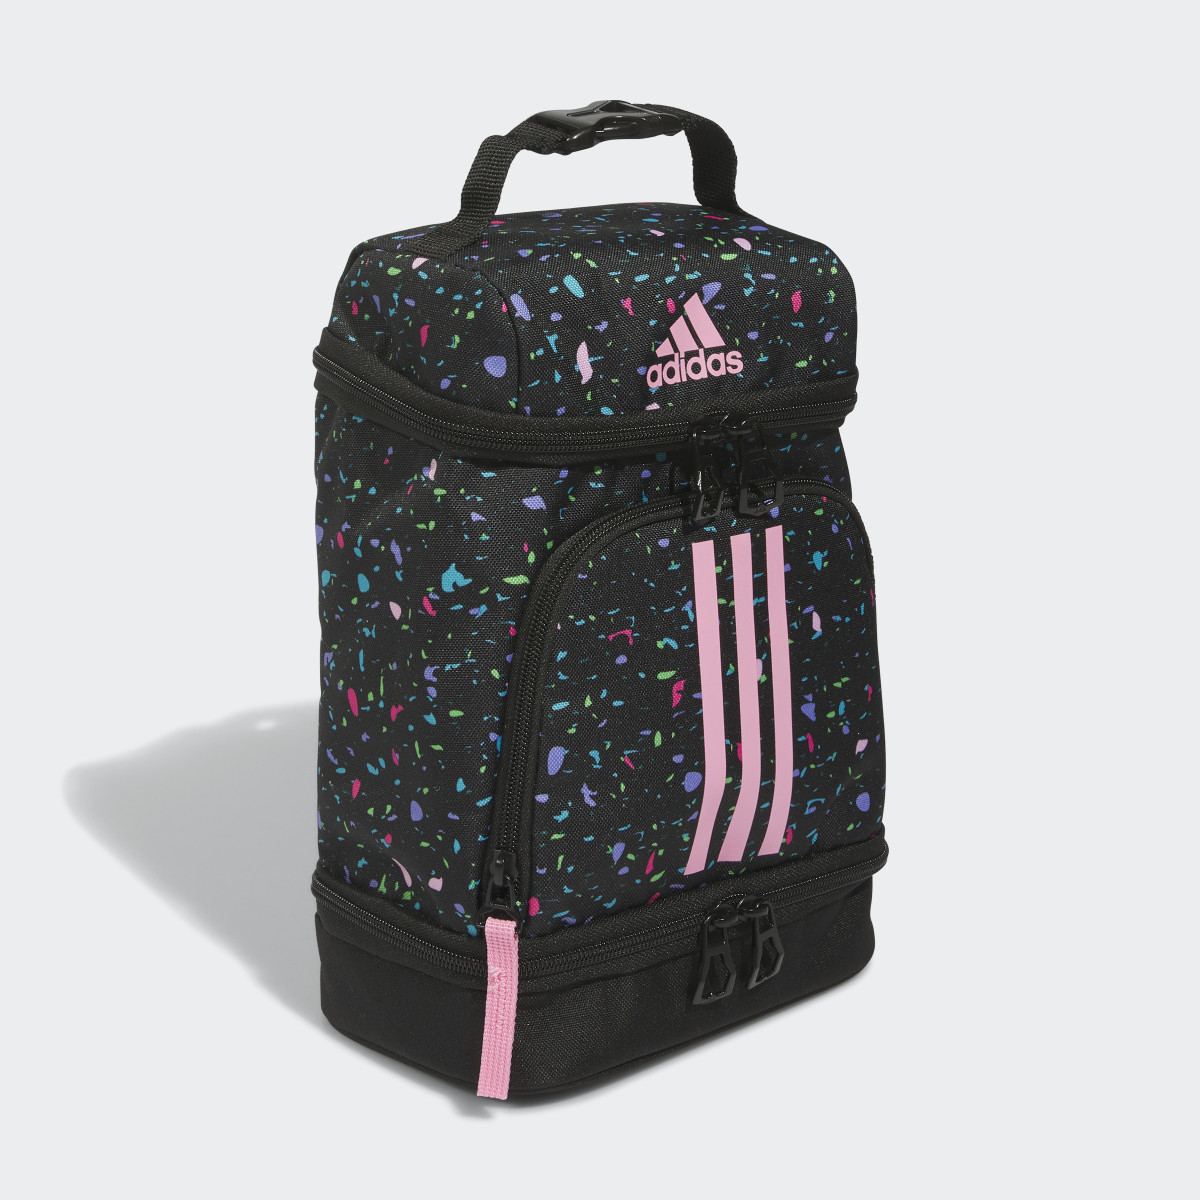 Adidas Excel Lunch Bag. 4